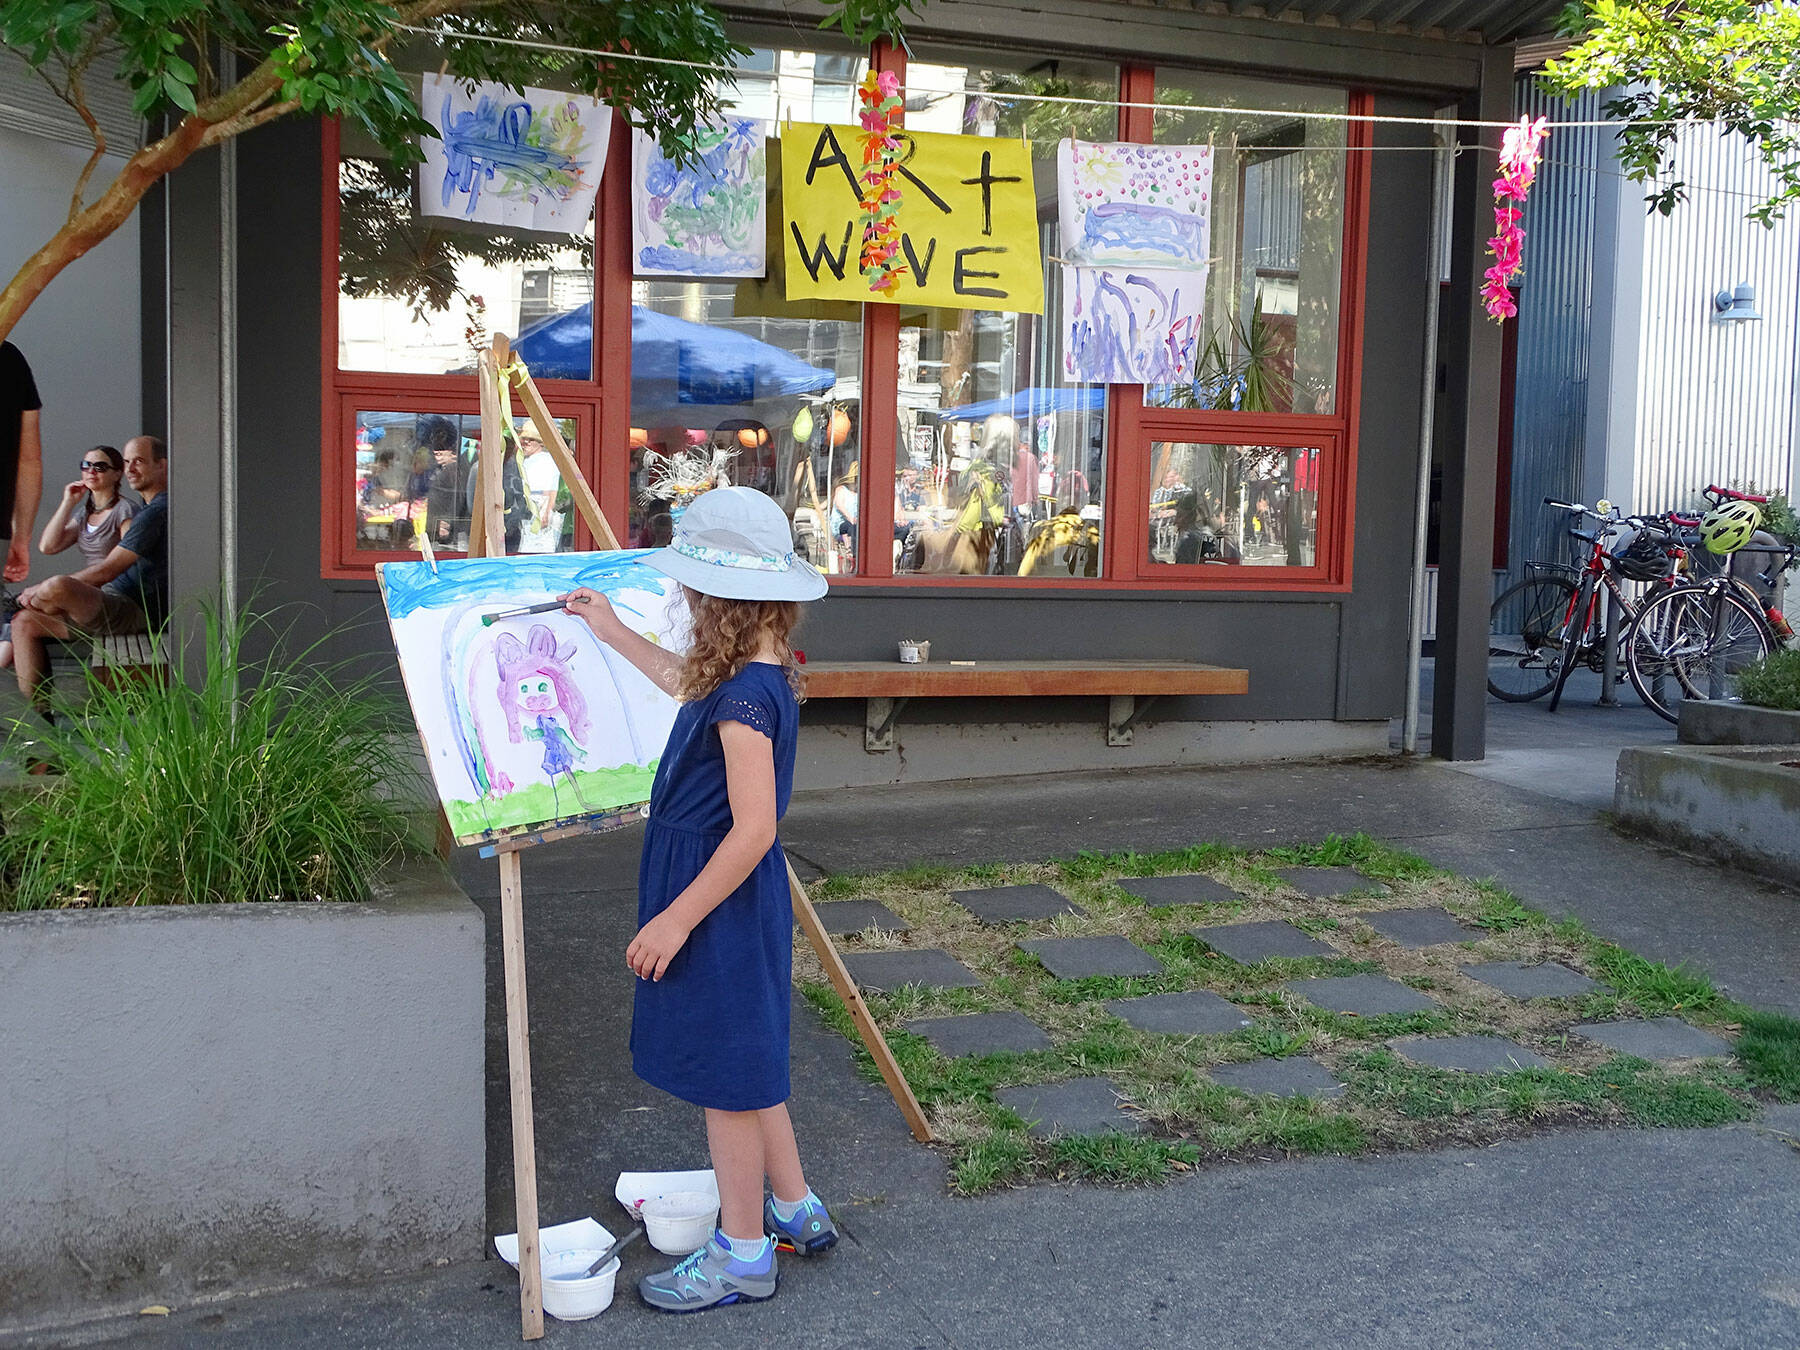 Free children’s art activities, such as this pictured in a file photo, at the Uptown Street Fair in Port Townsend will be from 10 a.m. to 1:30 p.m. Saturday.